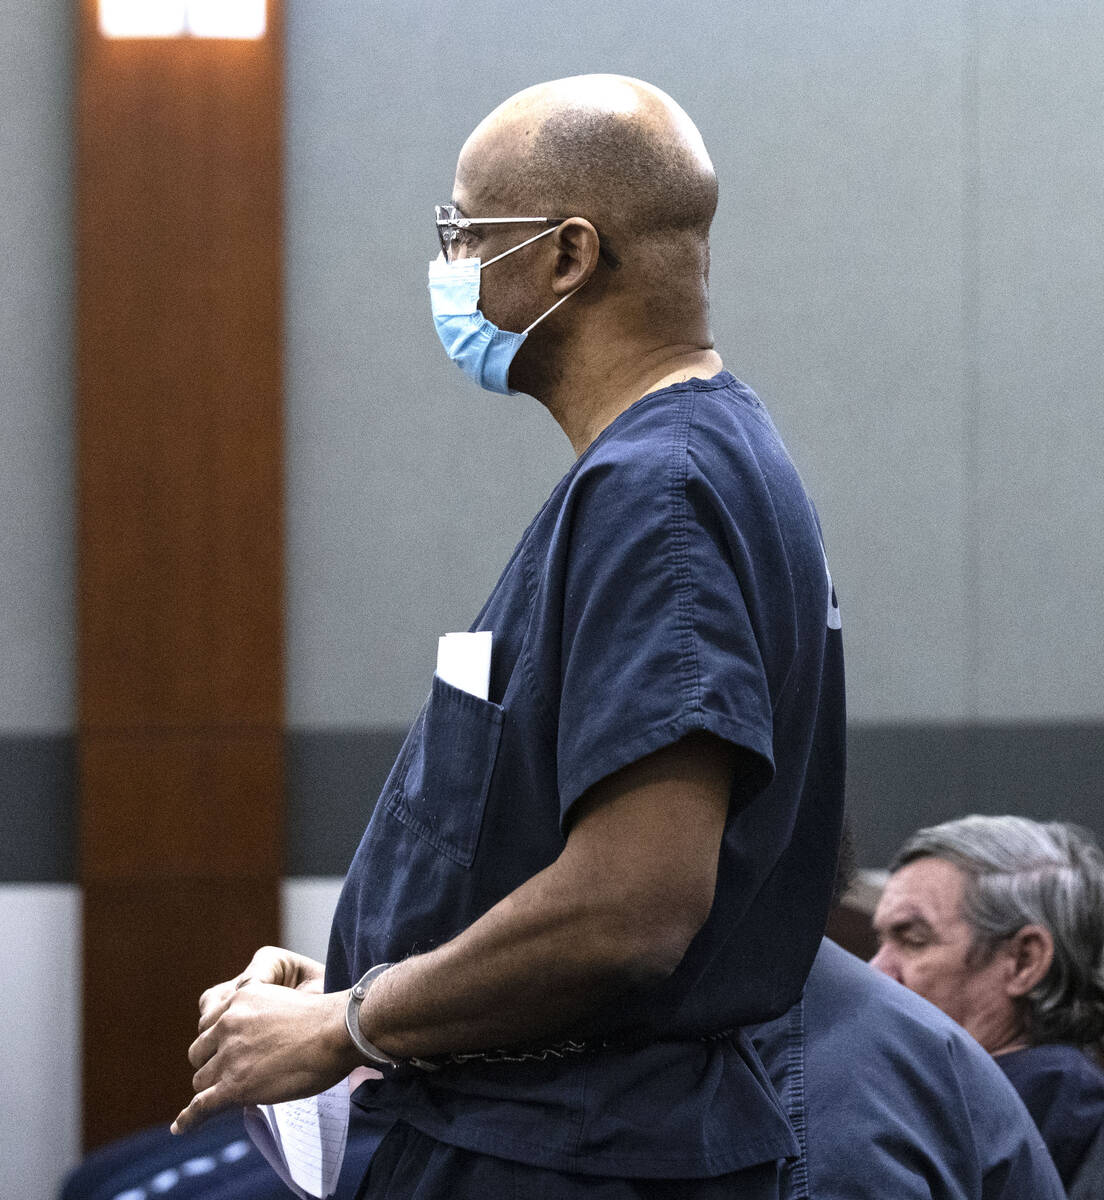 Wendell Melton, who was found guilty of killing his 14-year-old son, appears in court during hi ...